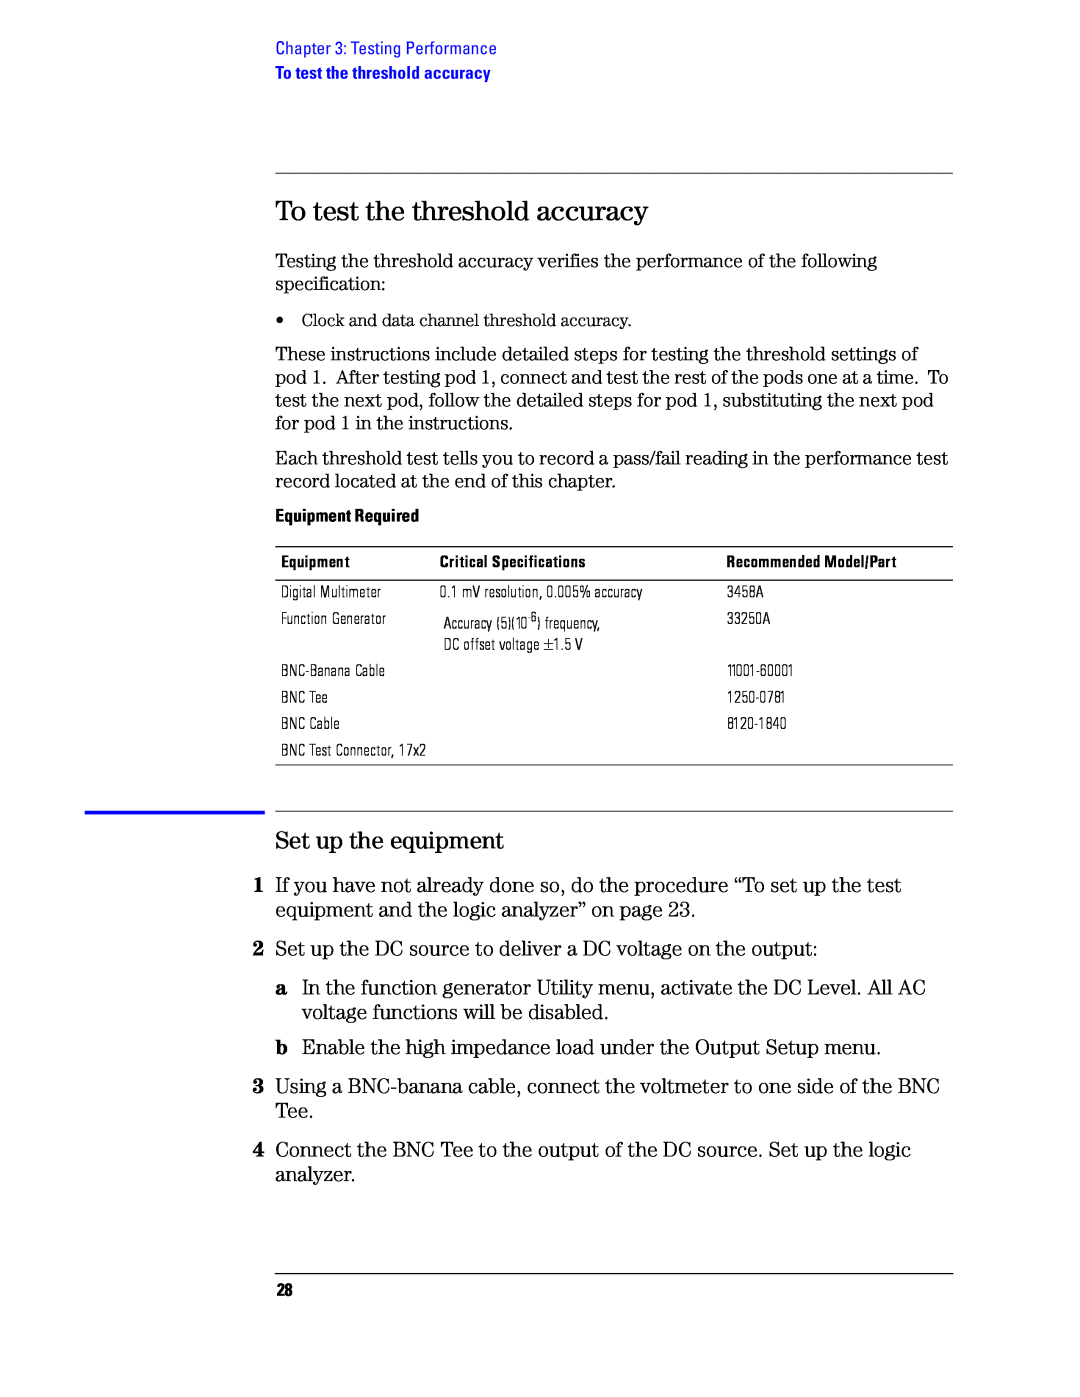 Agilent Technologies 1680, 1690 manual To test the threshold accuracy, Set up the equipment 